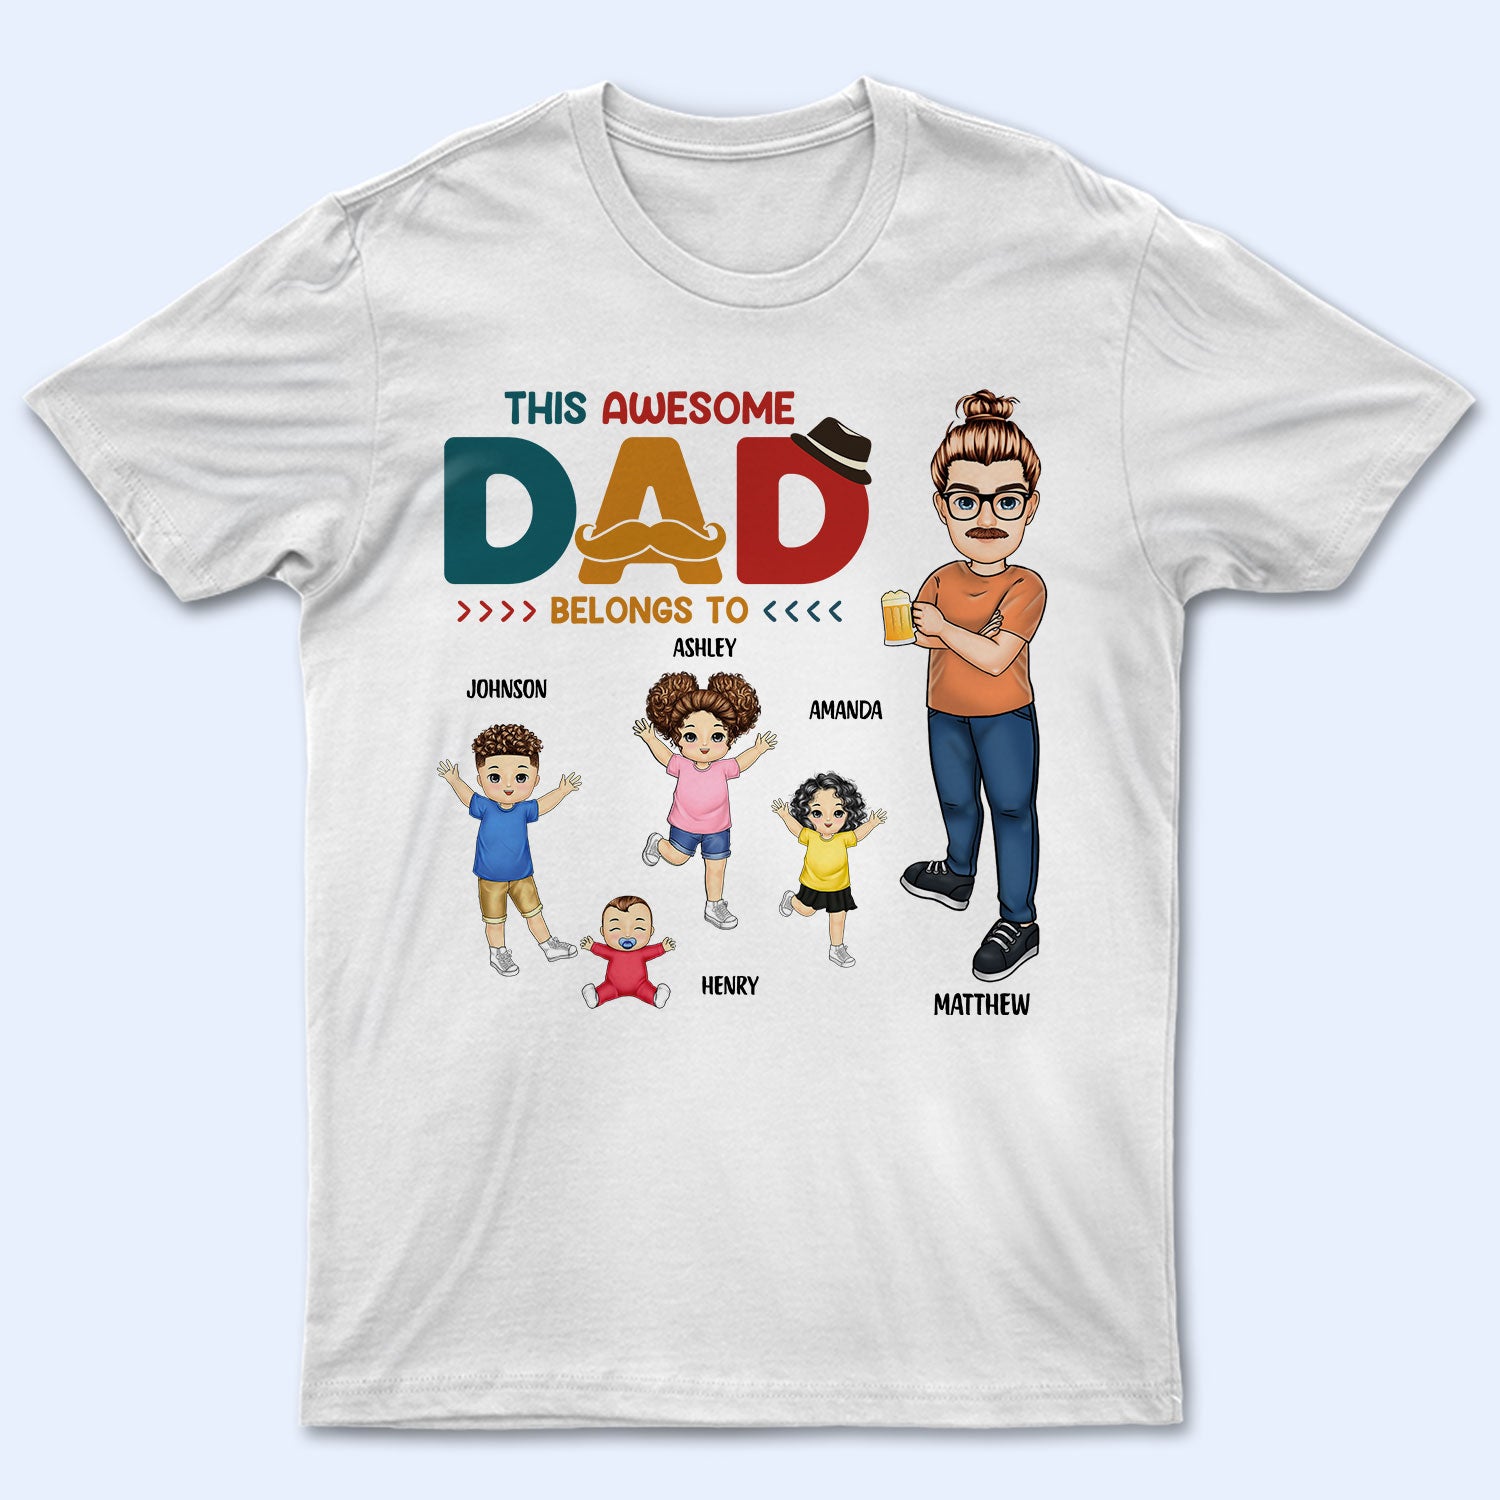 This Awesome Dad Belongs To - Gift For Grandpa, Father, Dad - Personalized T Shirt